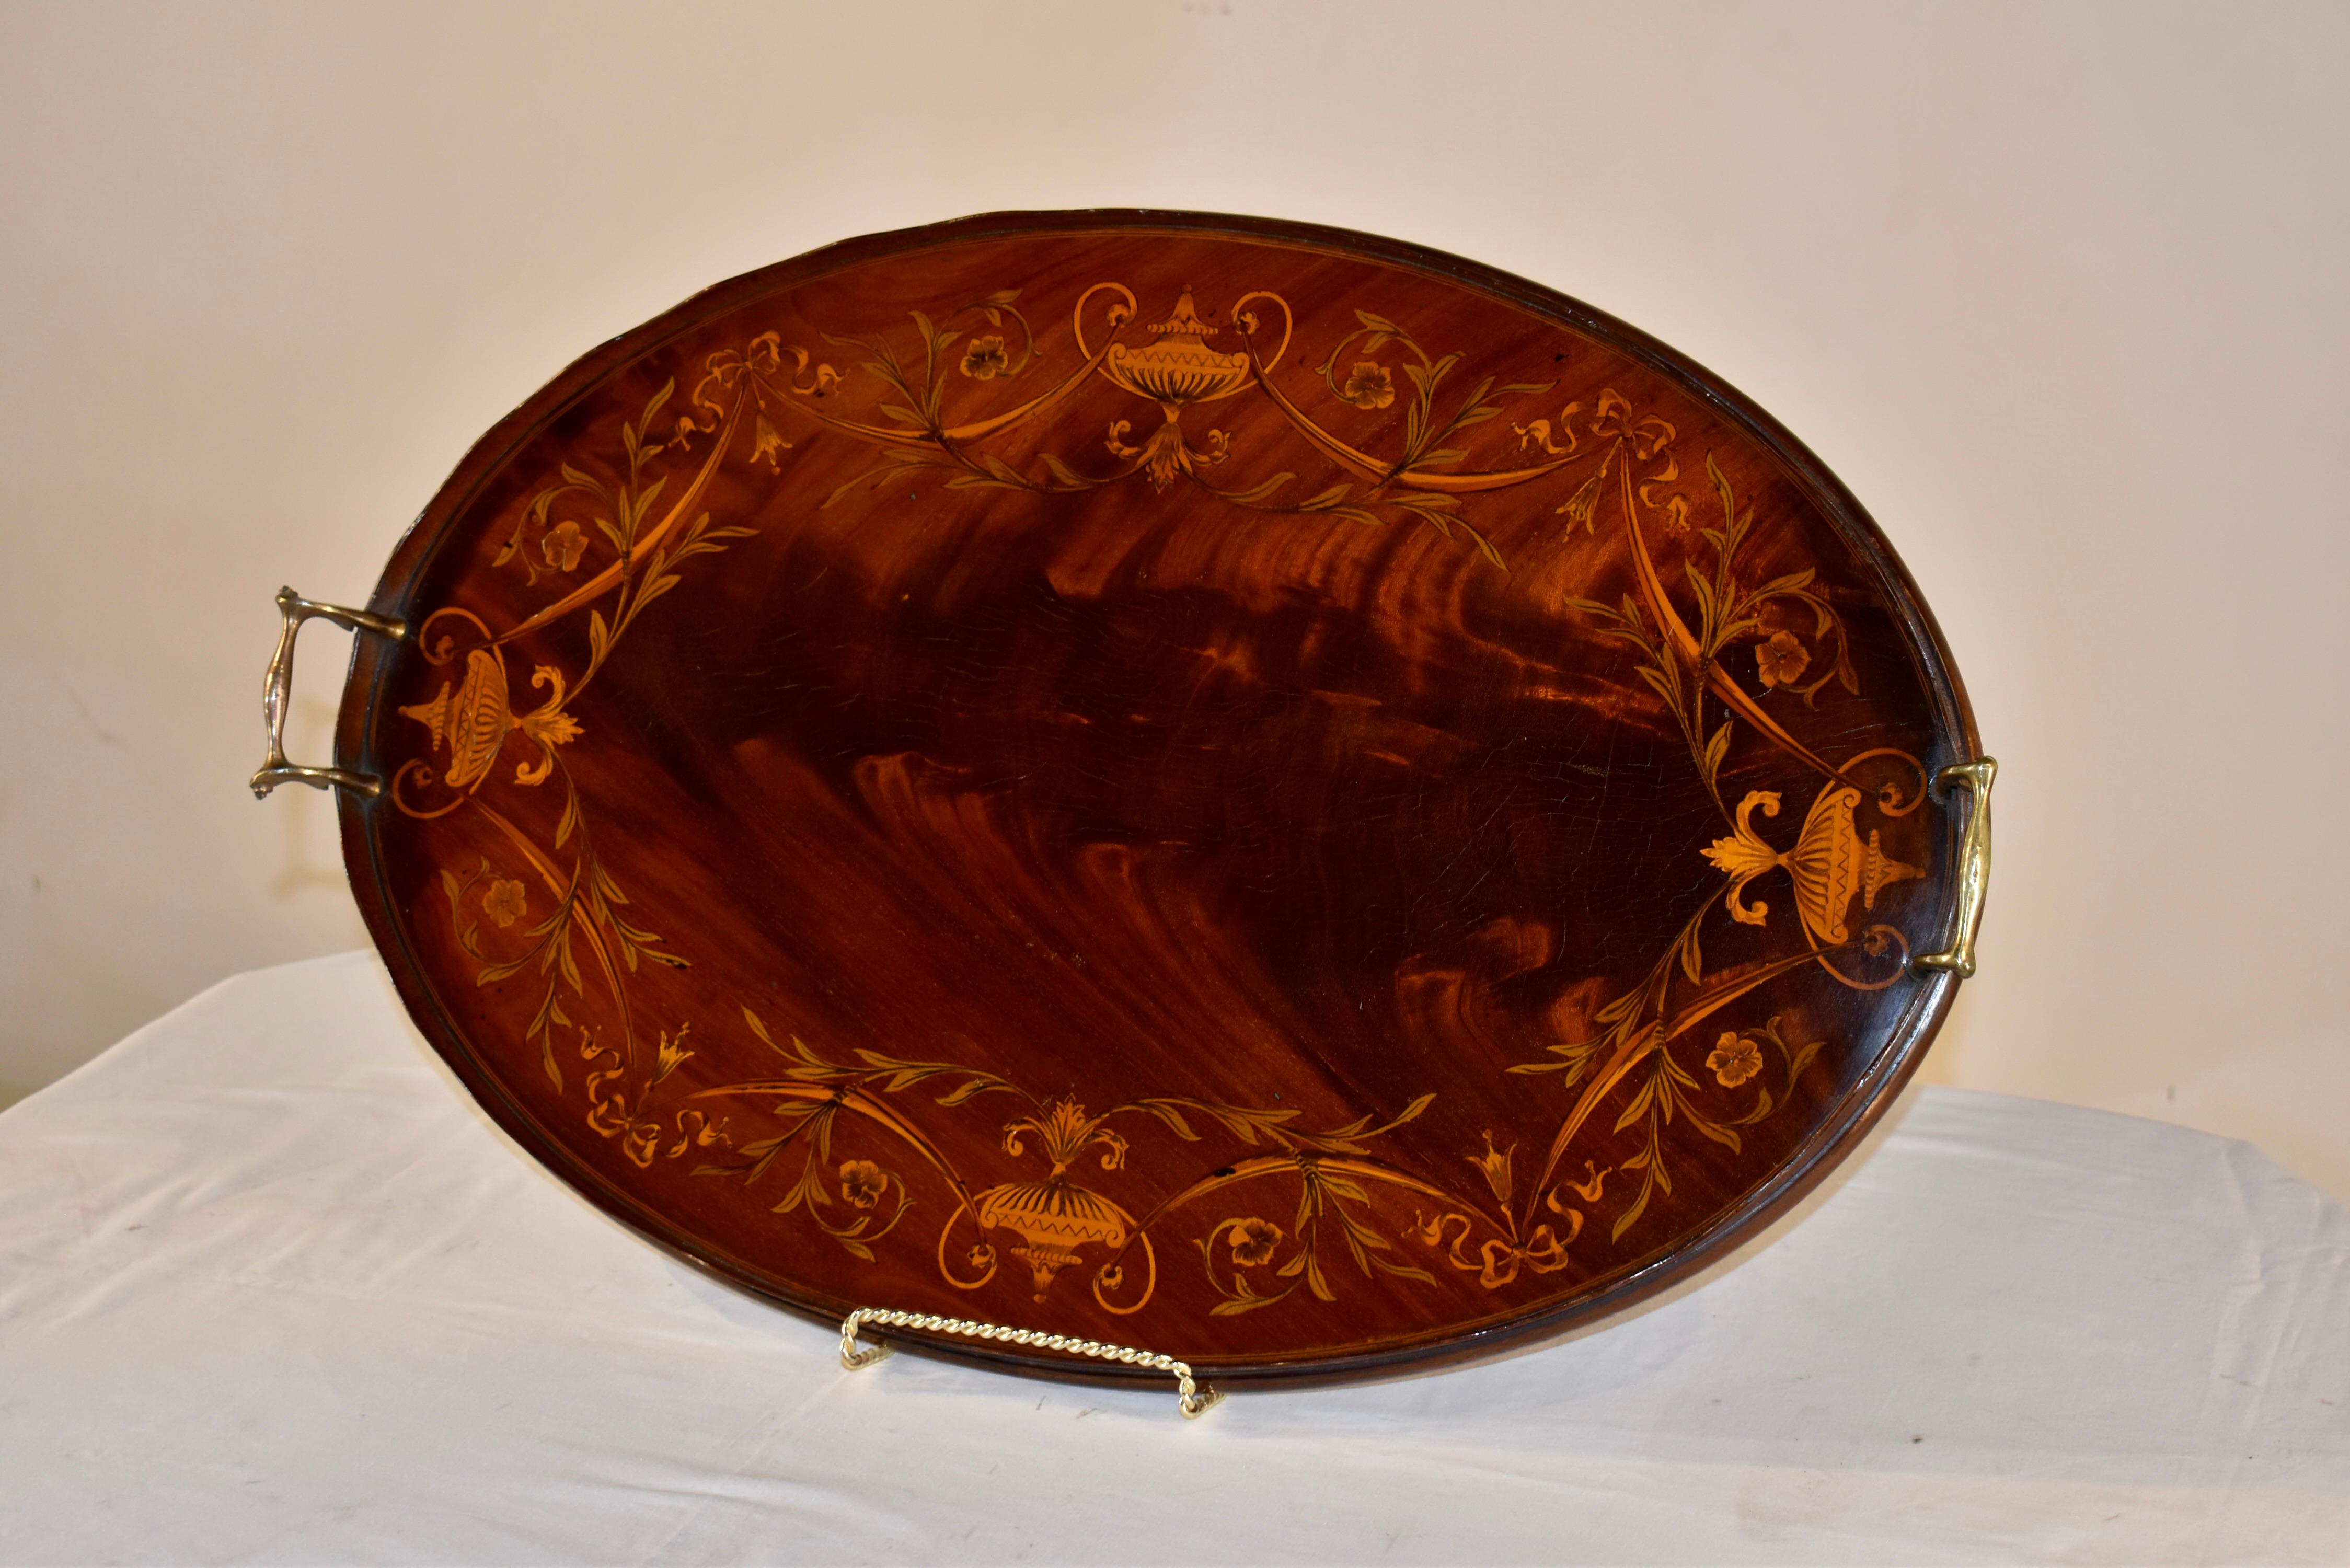 Early 19th century mahogany tray from England inlaid in a lovely pattern with florals and vines. On each side, there are symmetrical inlaid urns as well, and the floral swags and vines are in differing colors of dyed boxwood.  The tray has a hand